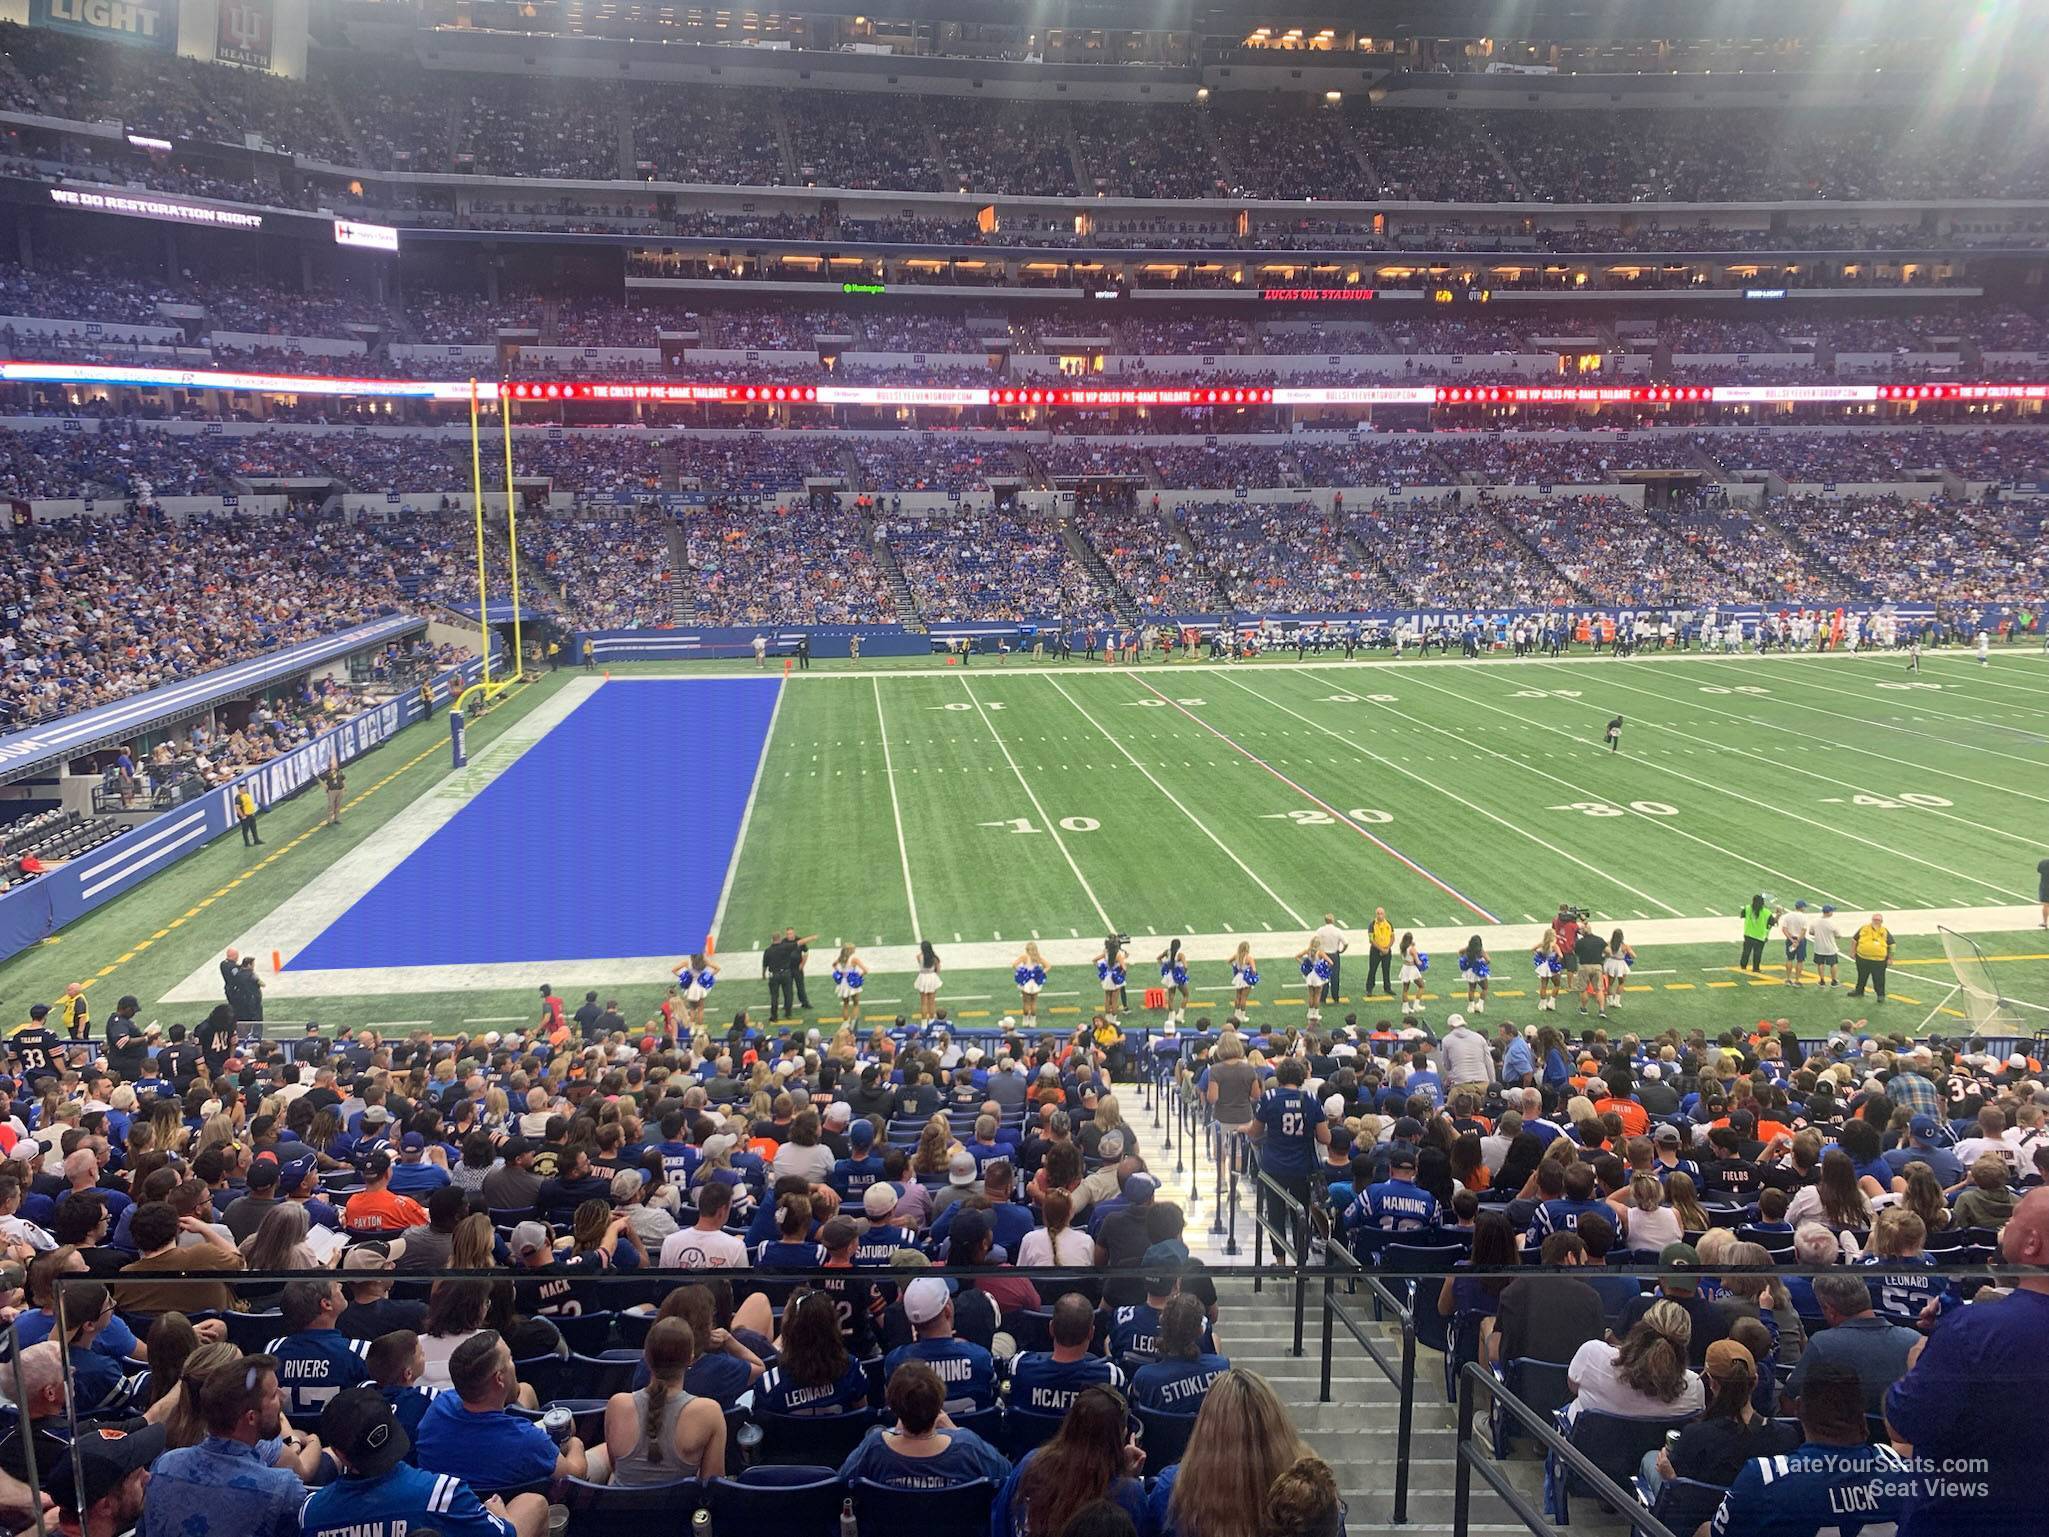 section 216, row 1 seat view  for football - lucas oil stadium